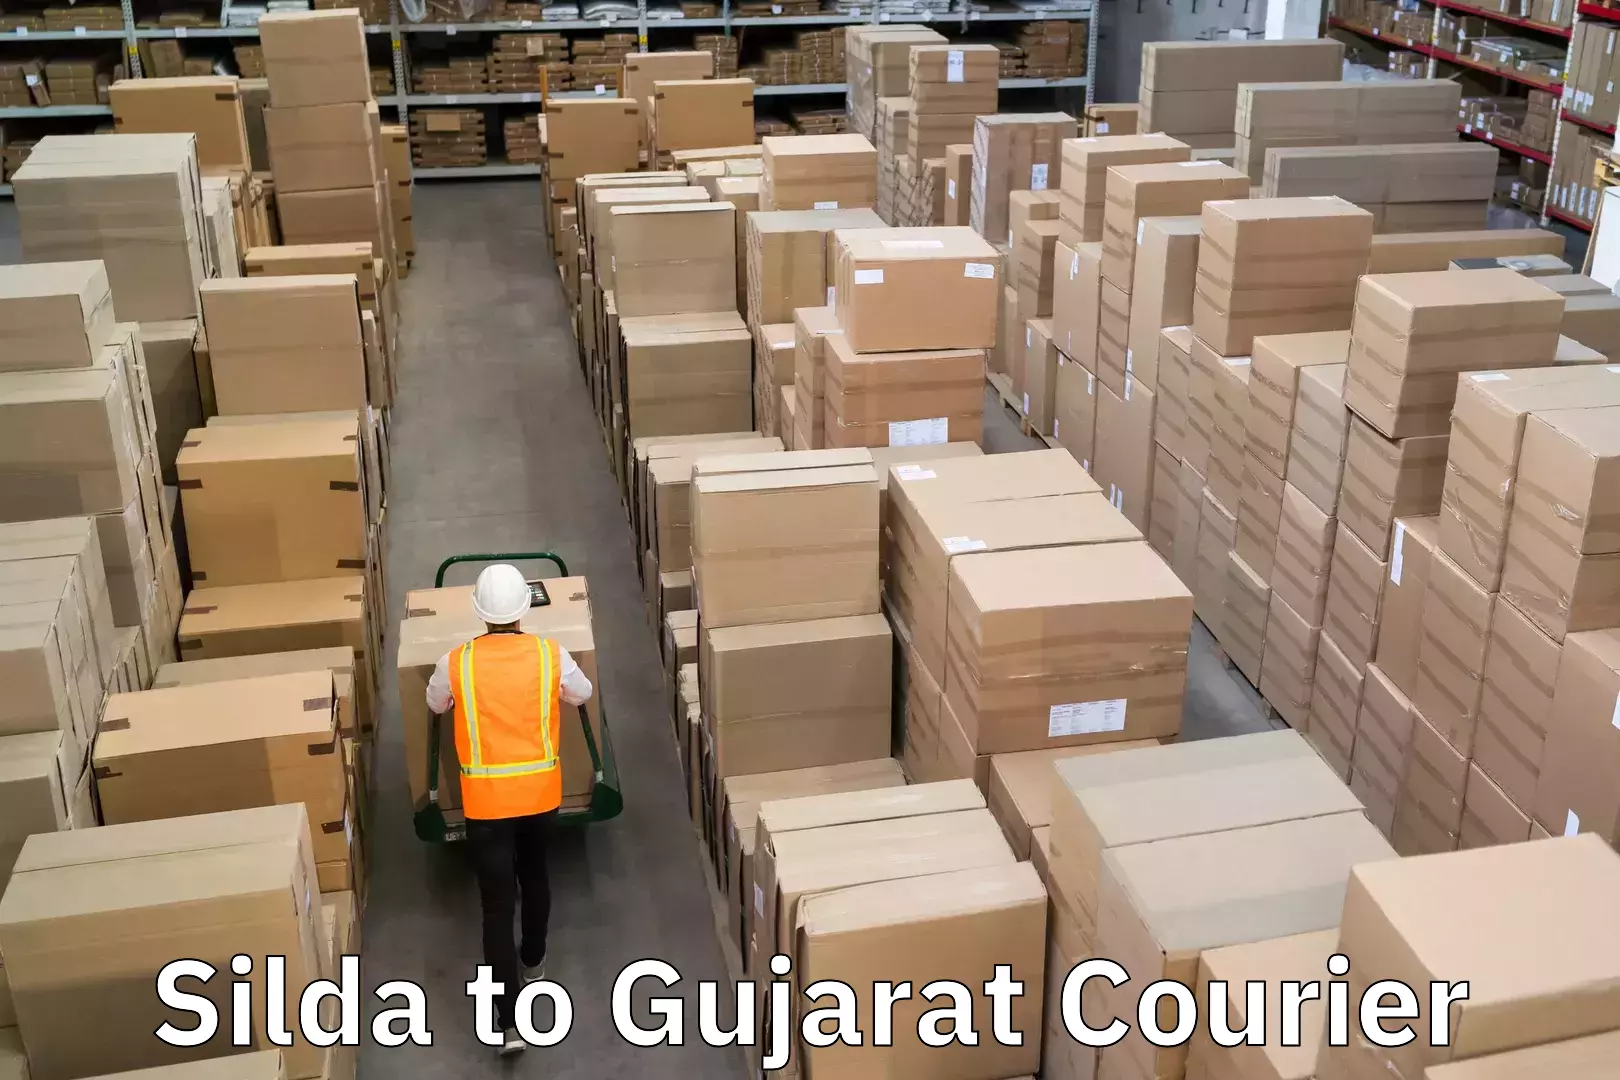 Courier service booking Silda to Gujarat